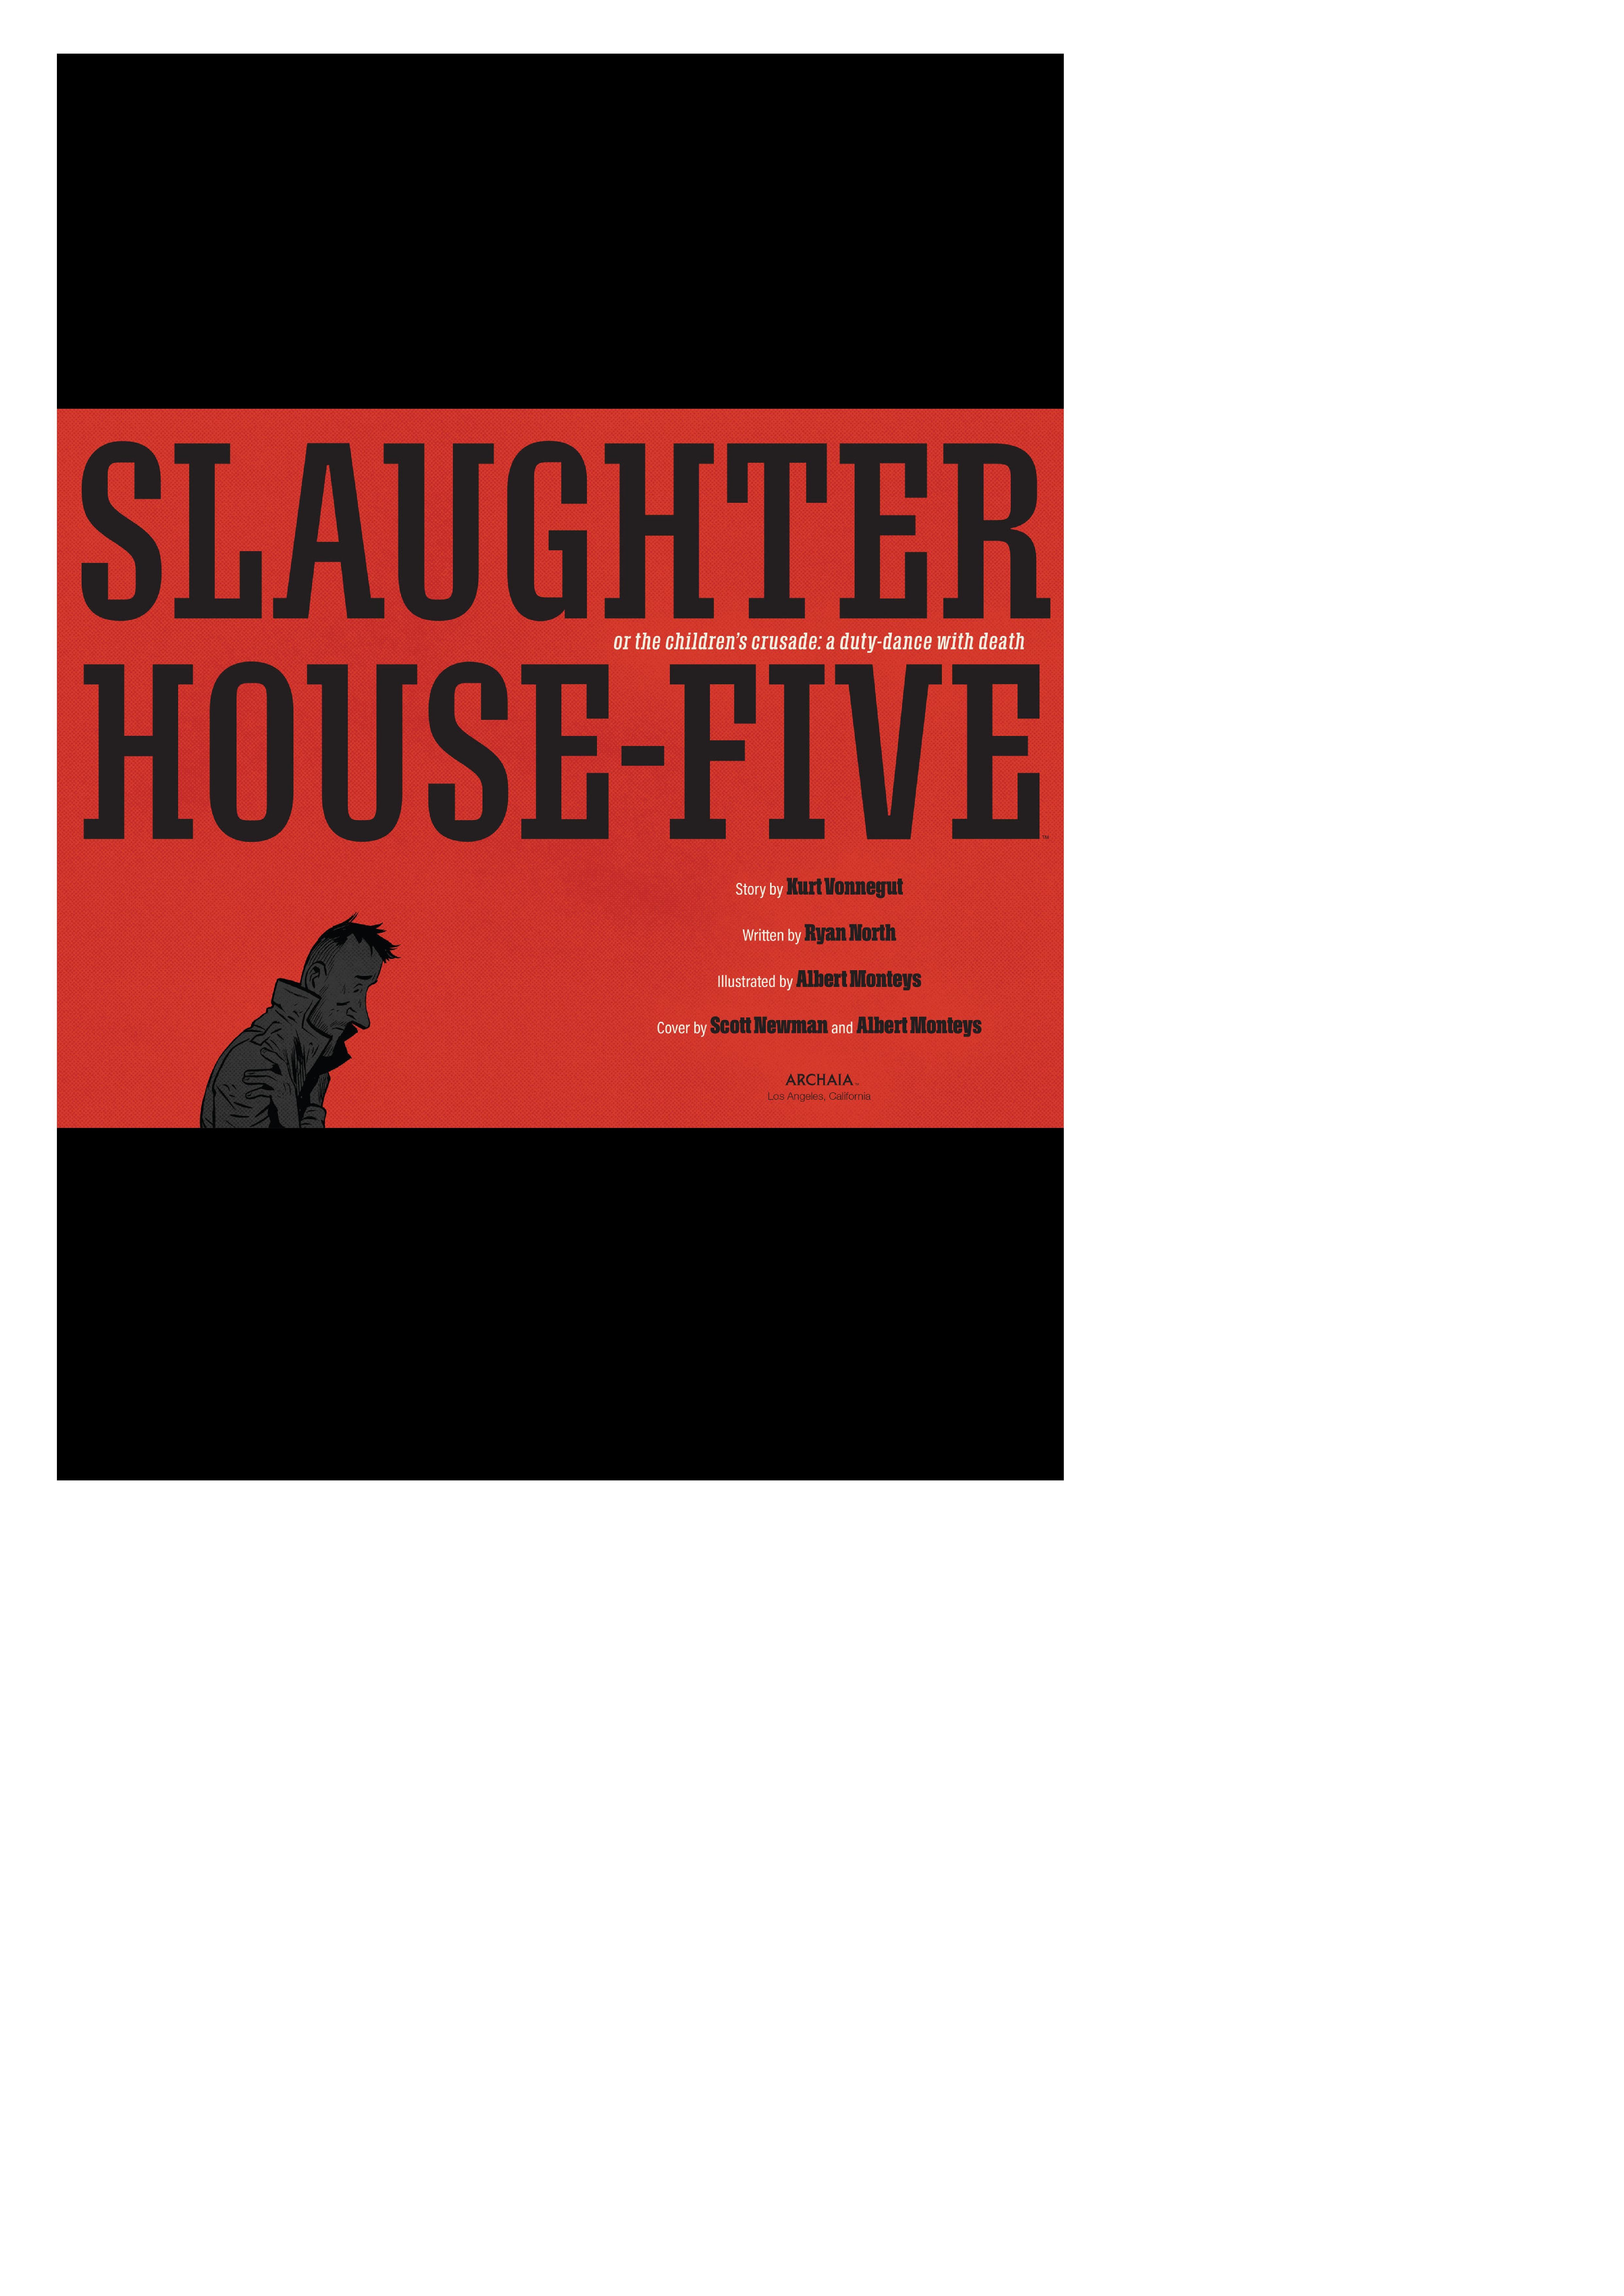 Read online Slaughter House-Five comic -  Issue # TPB (Part 1) - 5